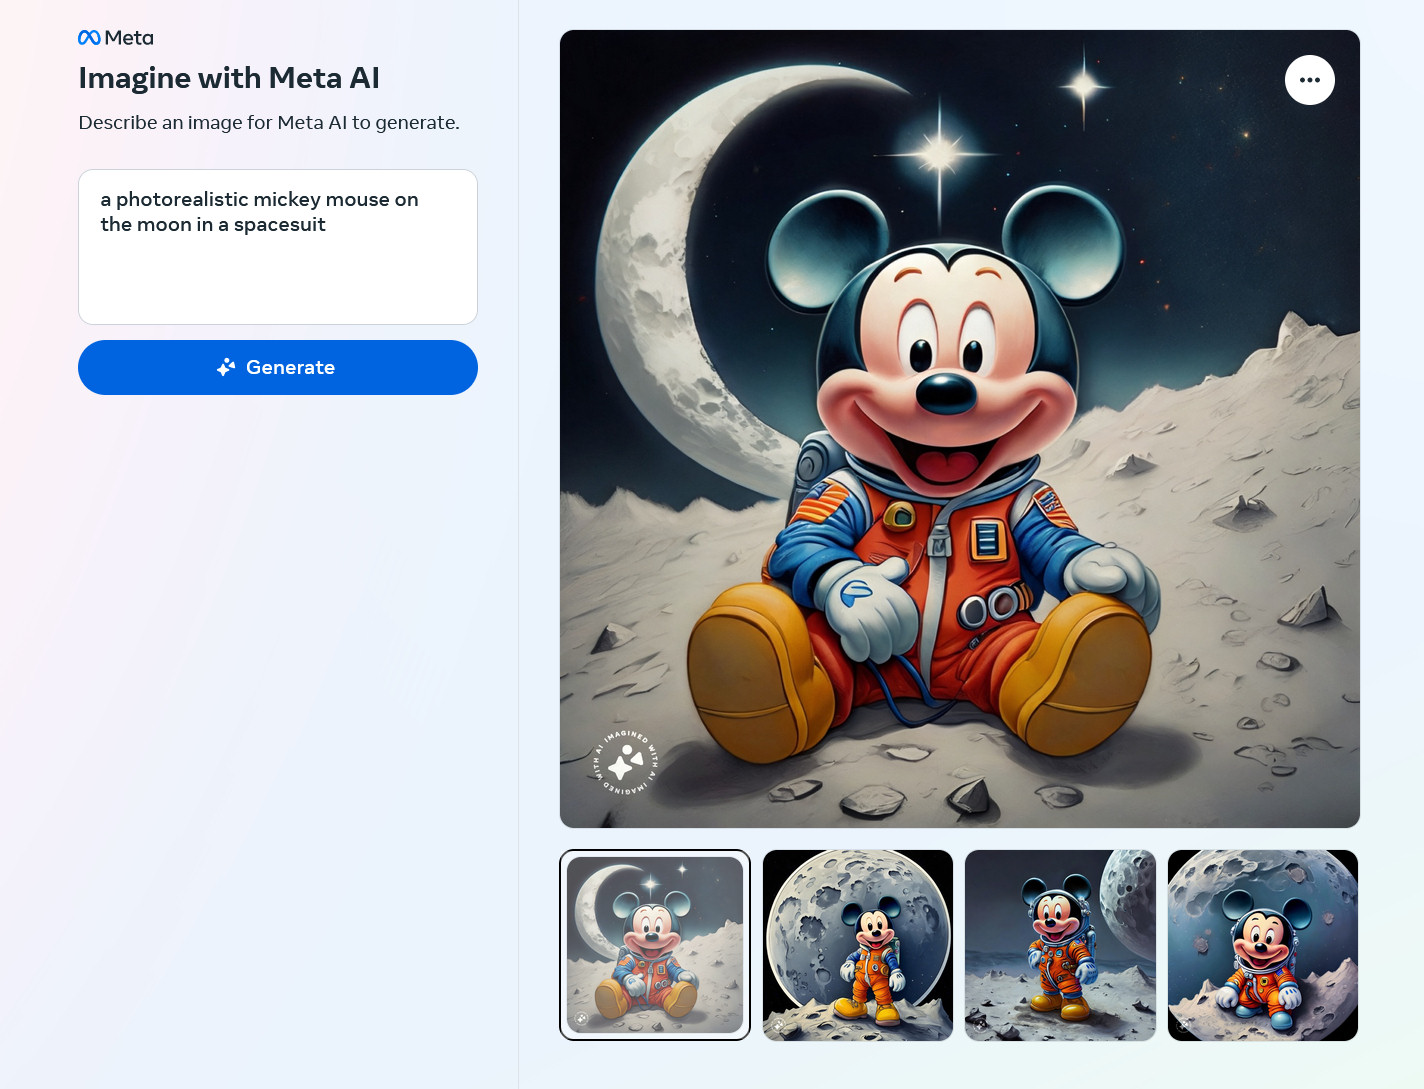 AI-generated images of a photorealistic Mickey Mouse on the moon in a spacesuit created by Meta Emu on the Imagine with Meta AI website.